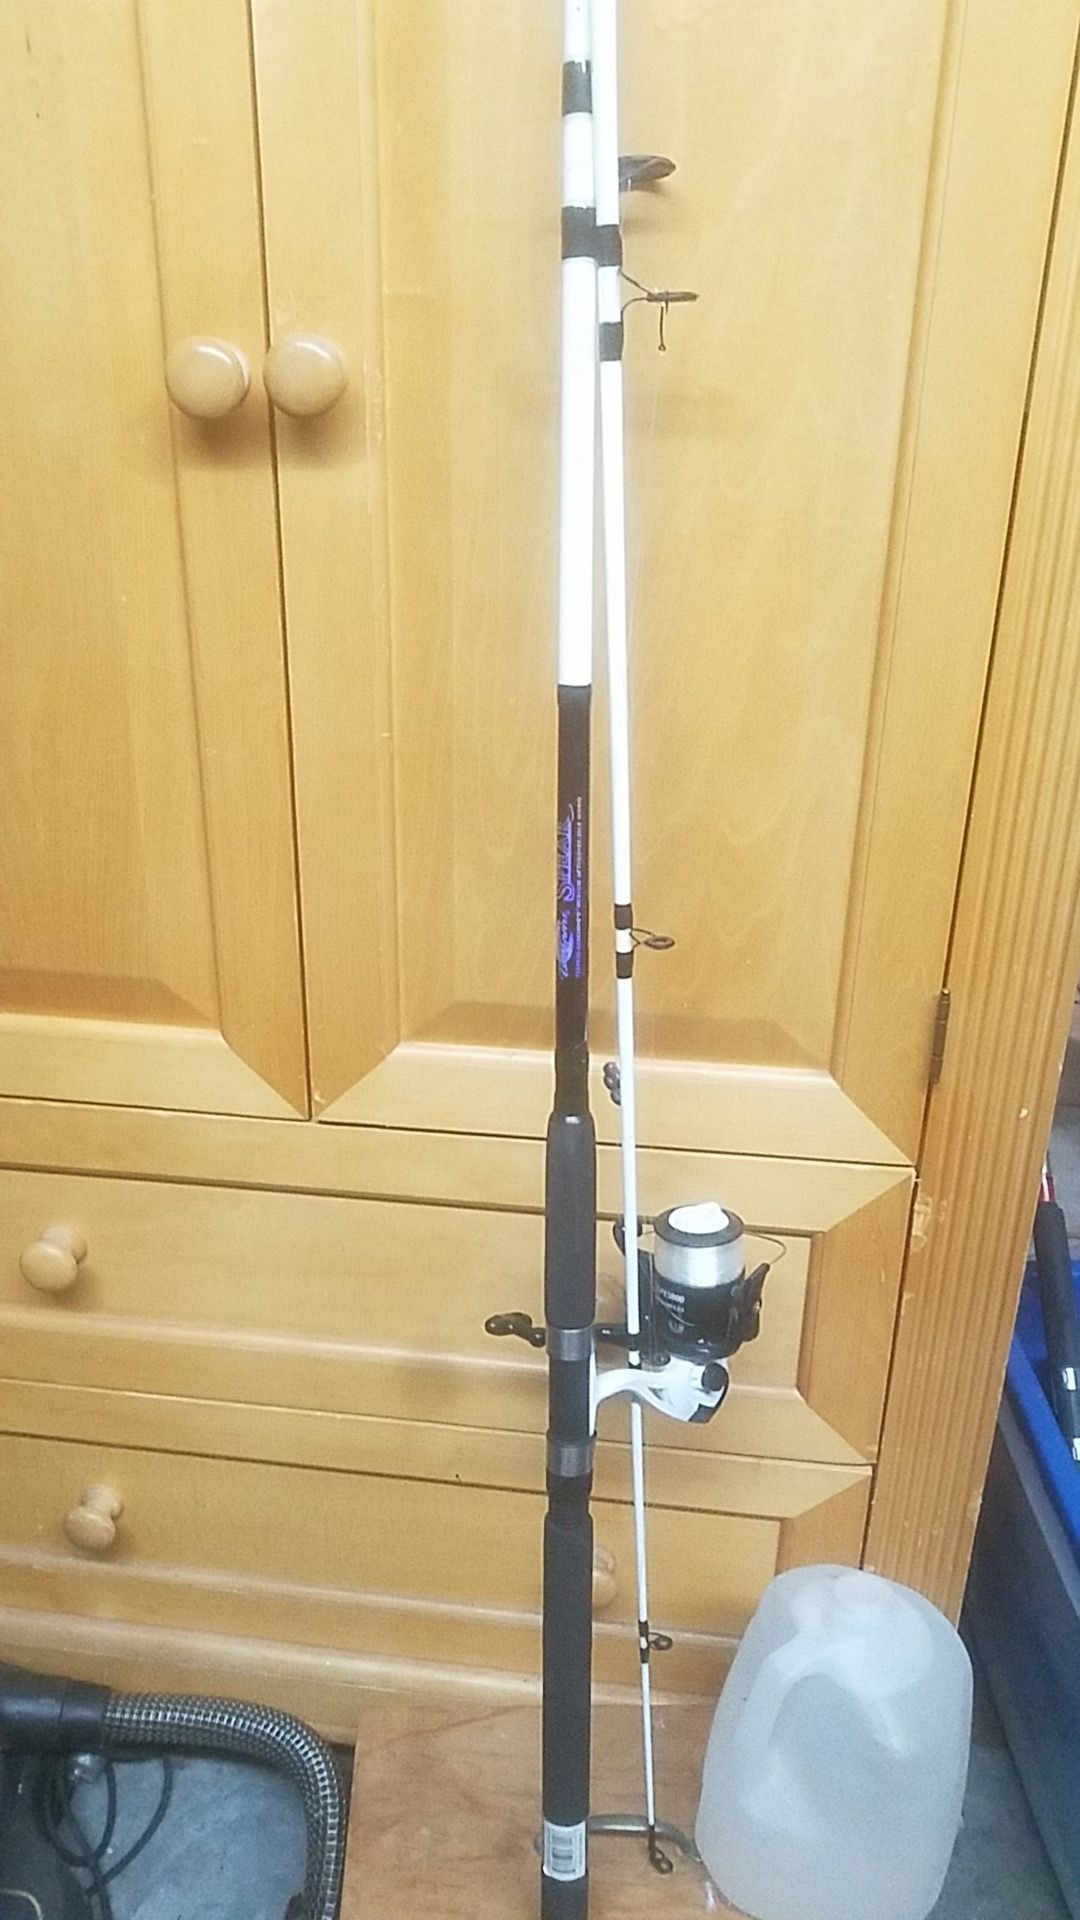 Tsunami spear med fishing pole with TSS PE 5000 real